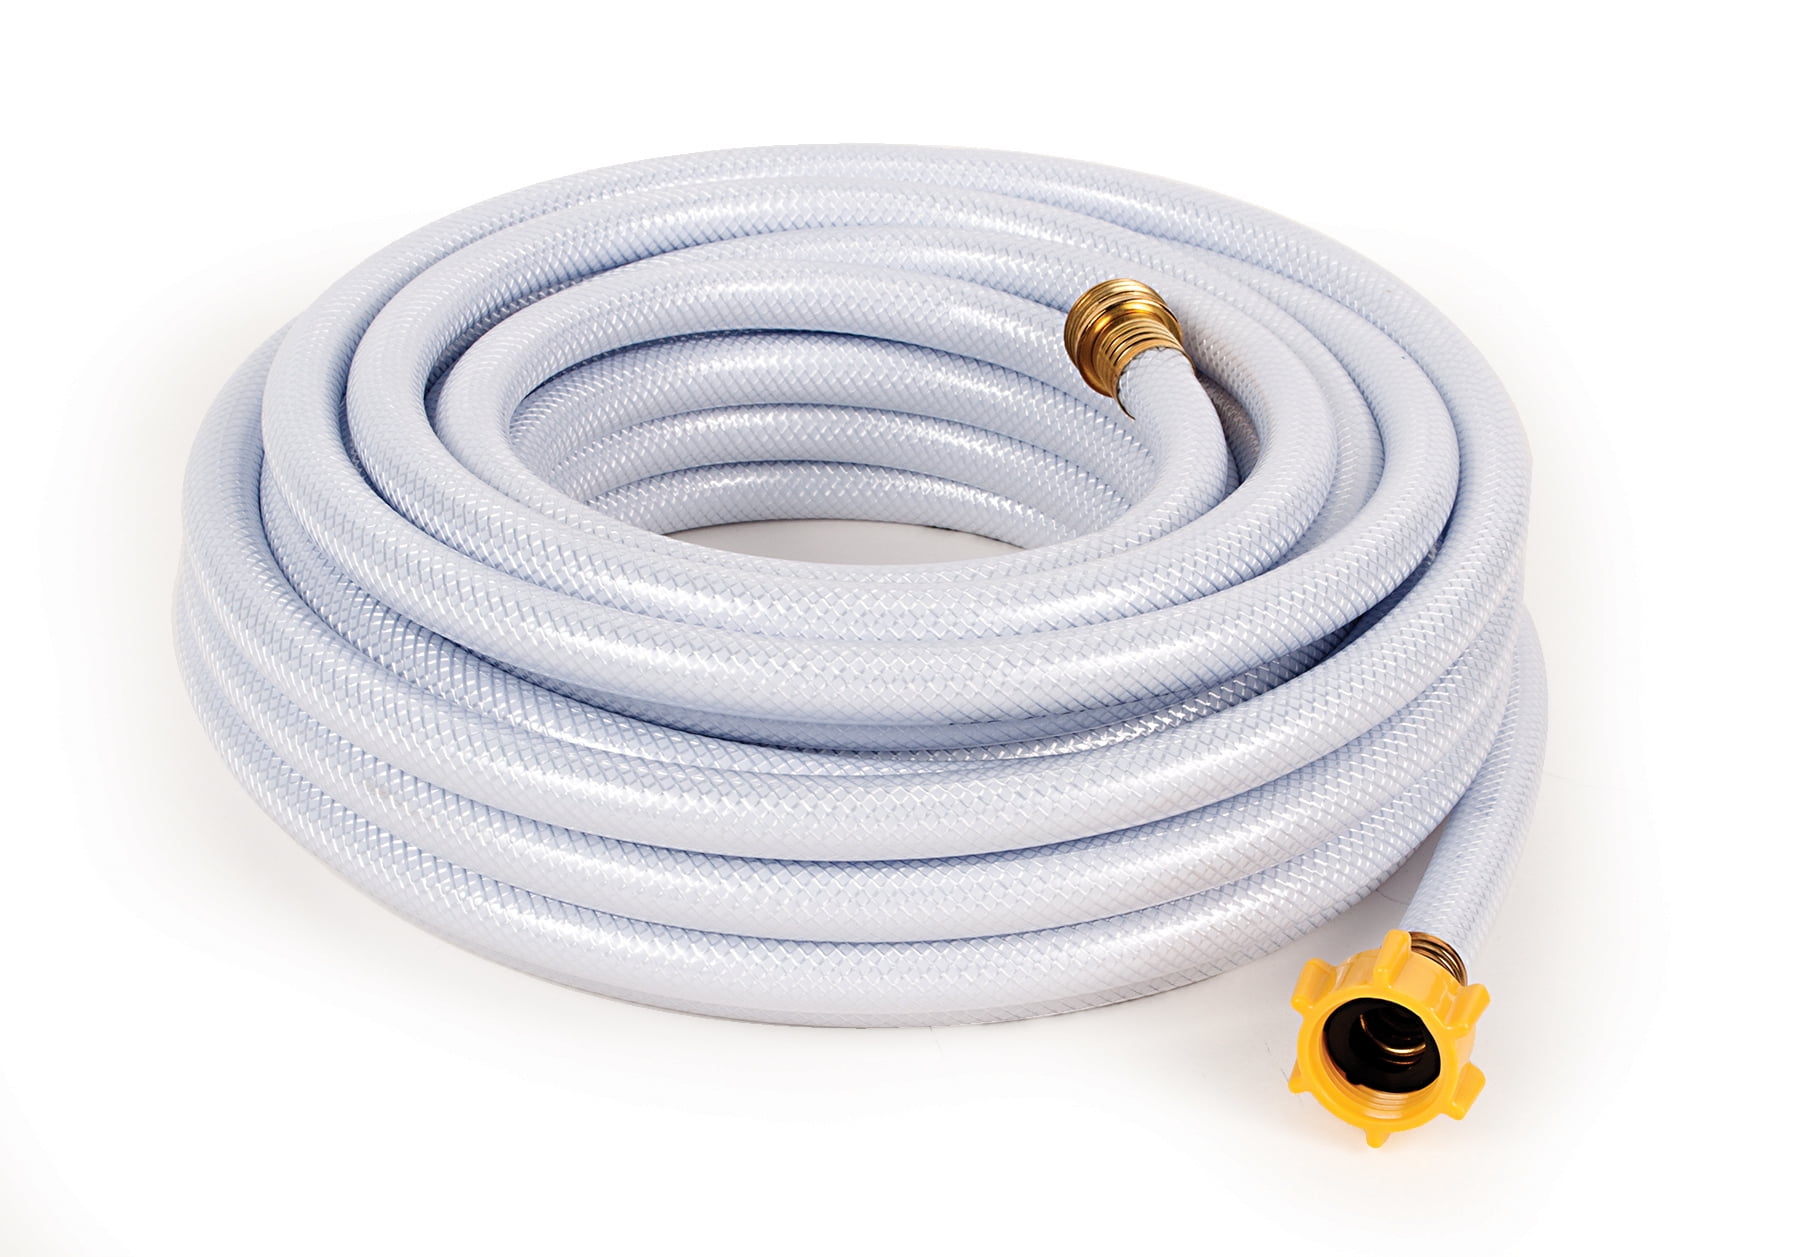 Flexible 5/8’’ Drinking Water Hose with Abrasion-Resistant Cover and Ergonomic Grip Aluminum Fittings No Kink Kohree 50FT RV Water Hose Leak Free Heavy Duty Lightweight for Camper Garden 